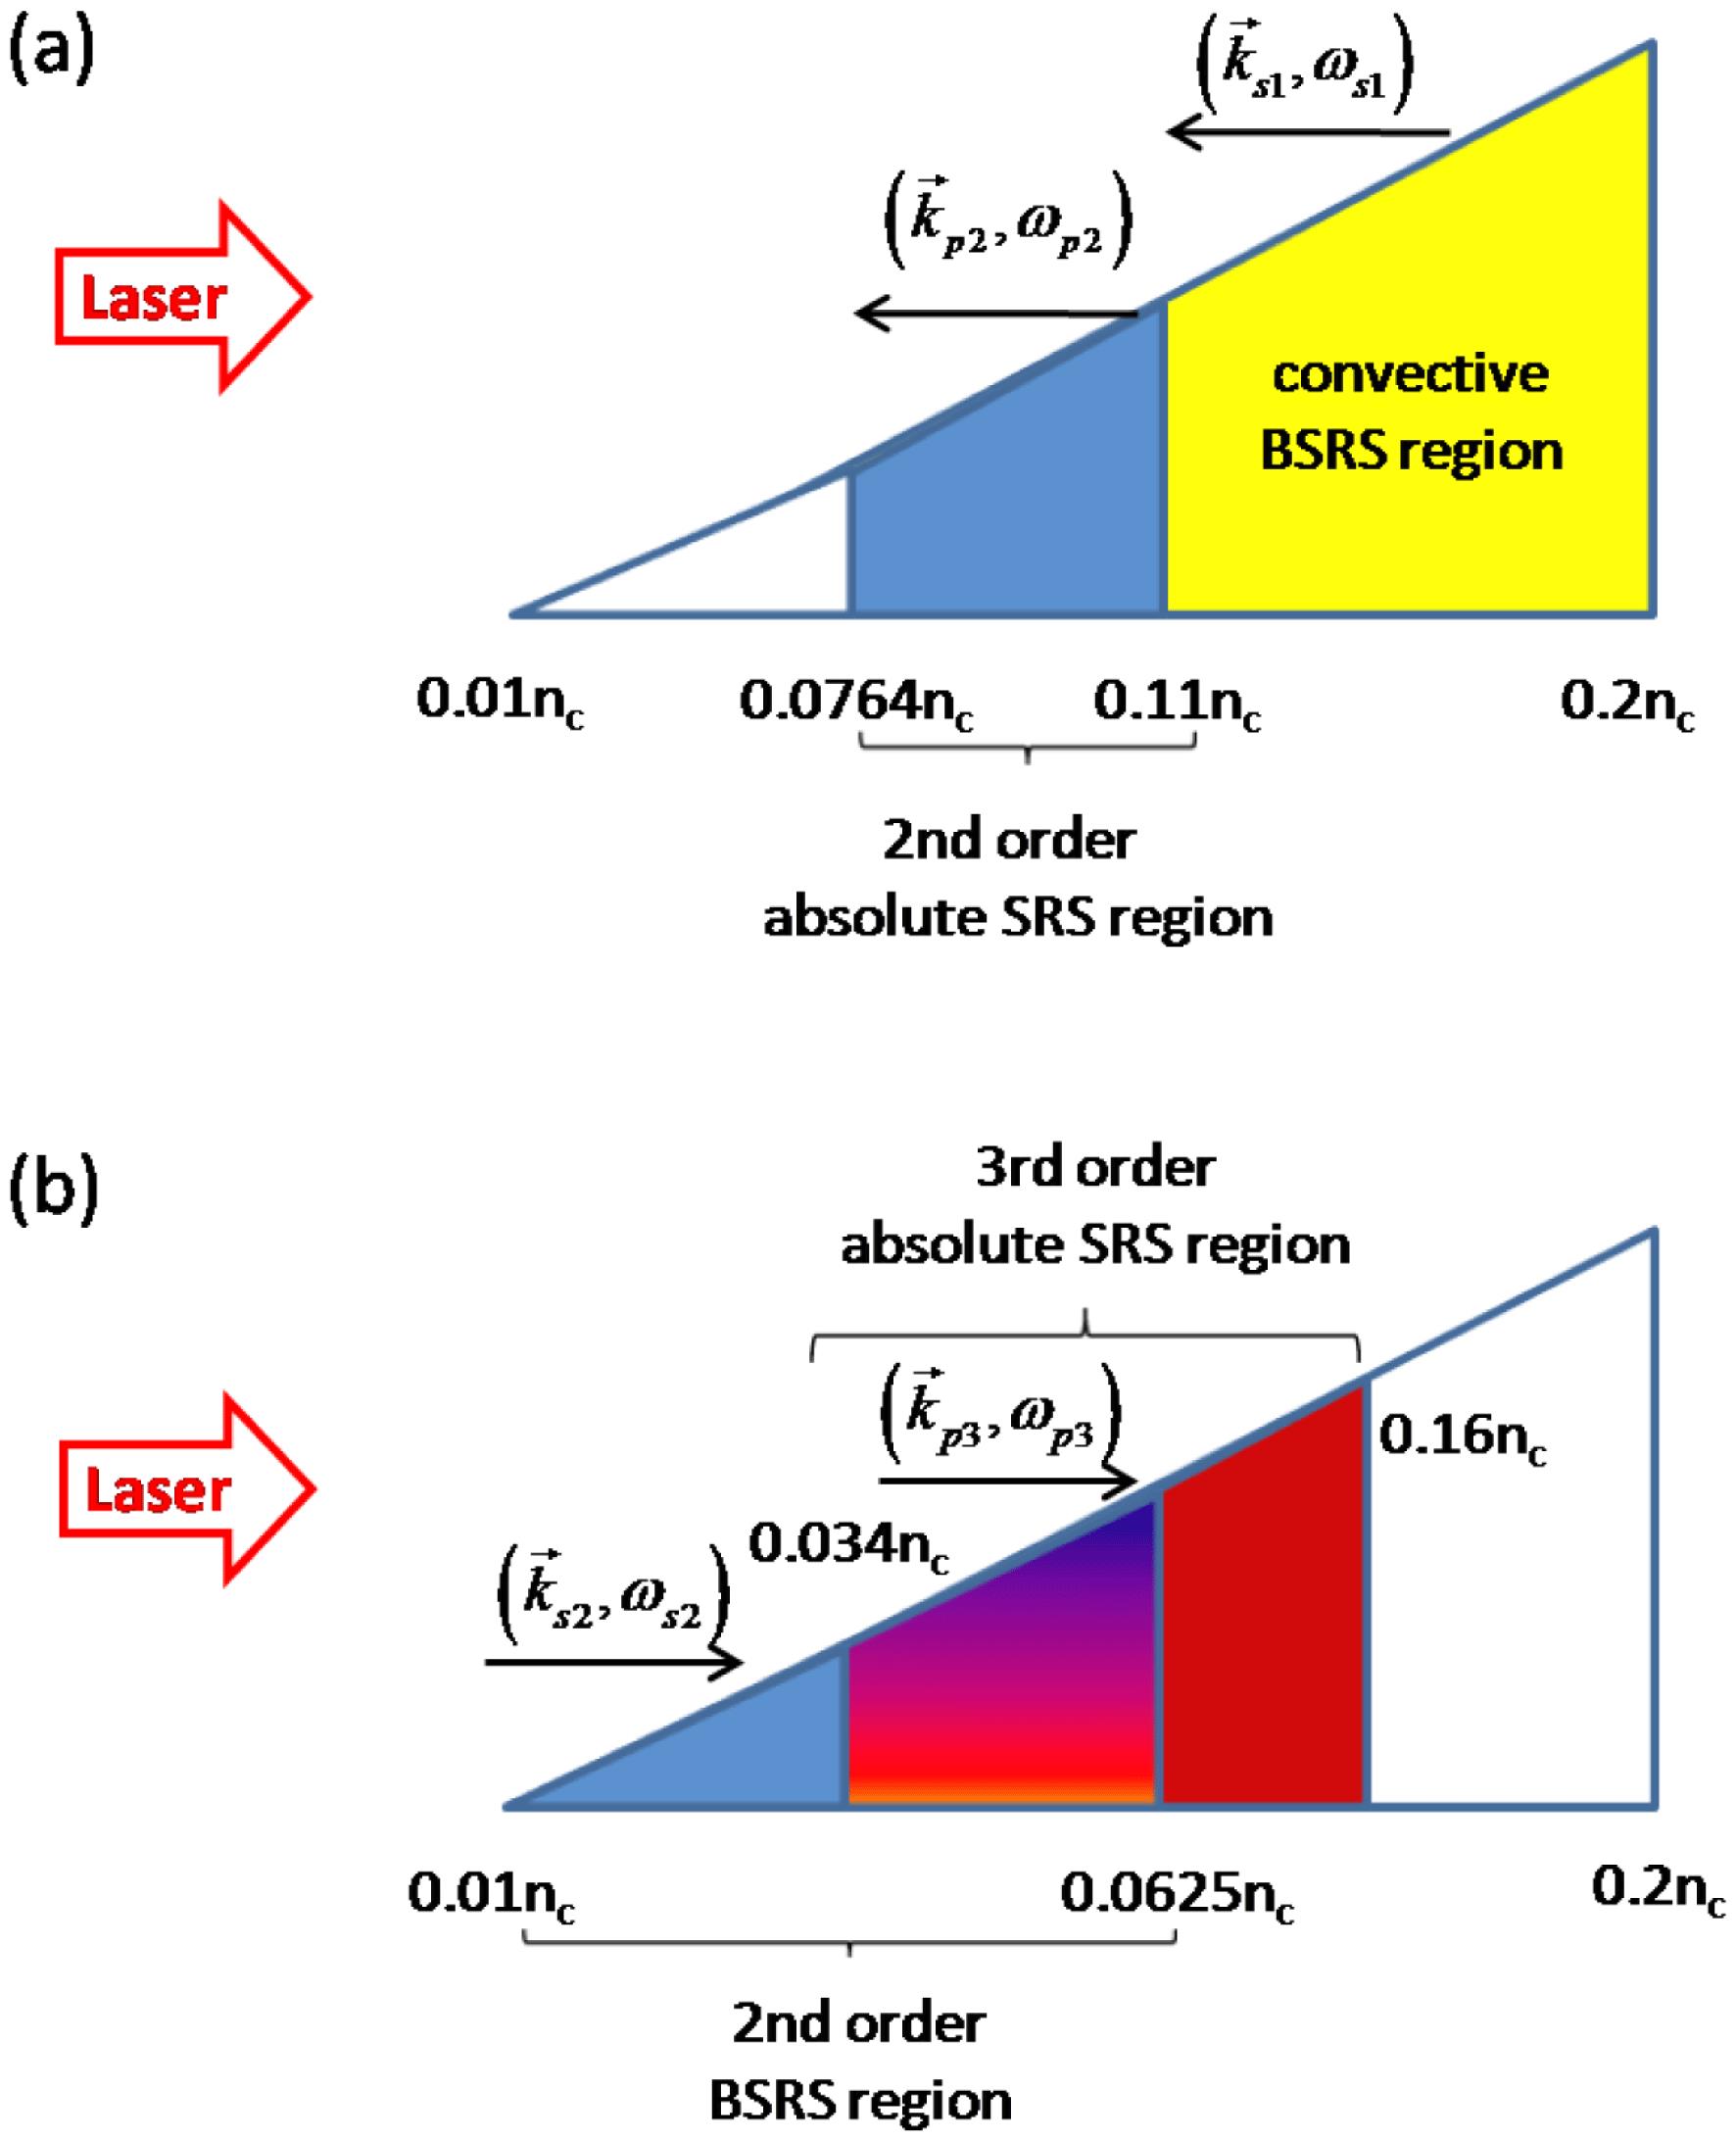 Schematic diagram for absolute instability regions due to (a) the second-order rescattering of SRS and (b) the third-order rescattering of SRS in a linearly inhomogeneous plasma with density $[0.01,0.2]n_{c}$. BSRS means backscattering of SRS.